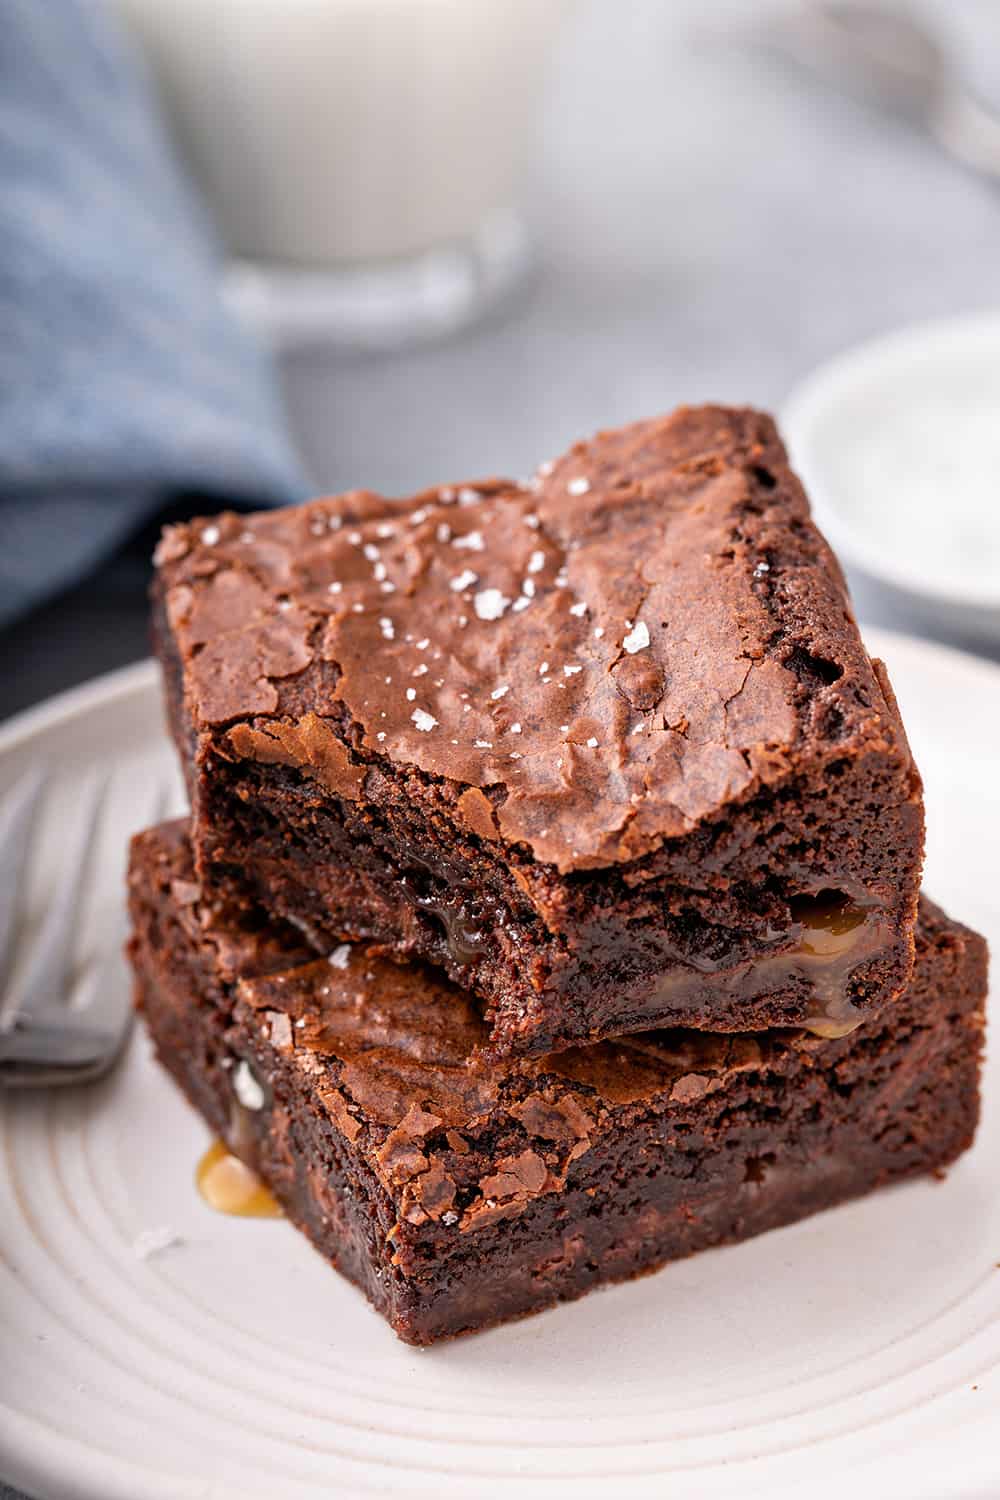 The Salted Brownies | My Baking Addiction